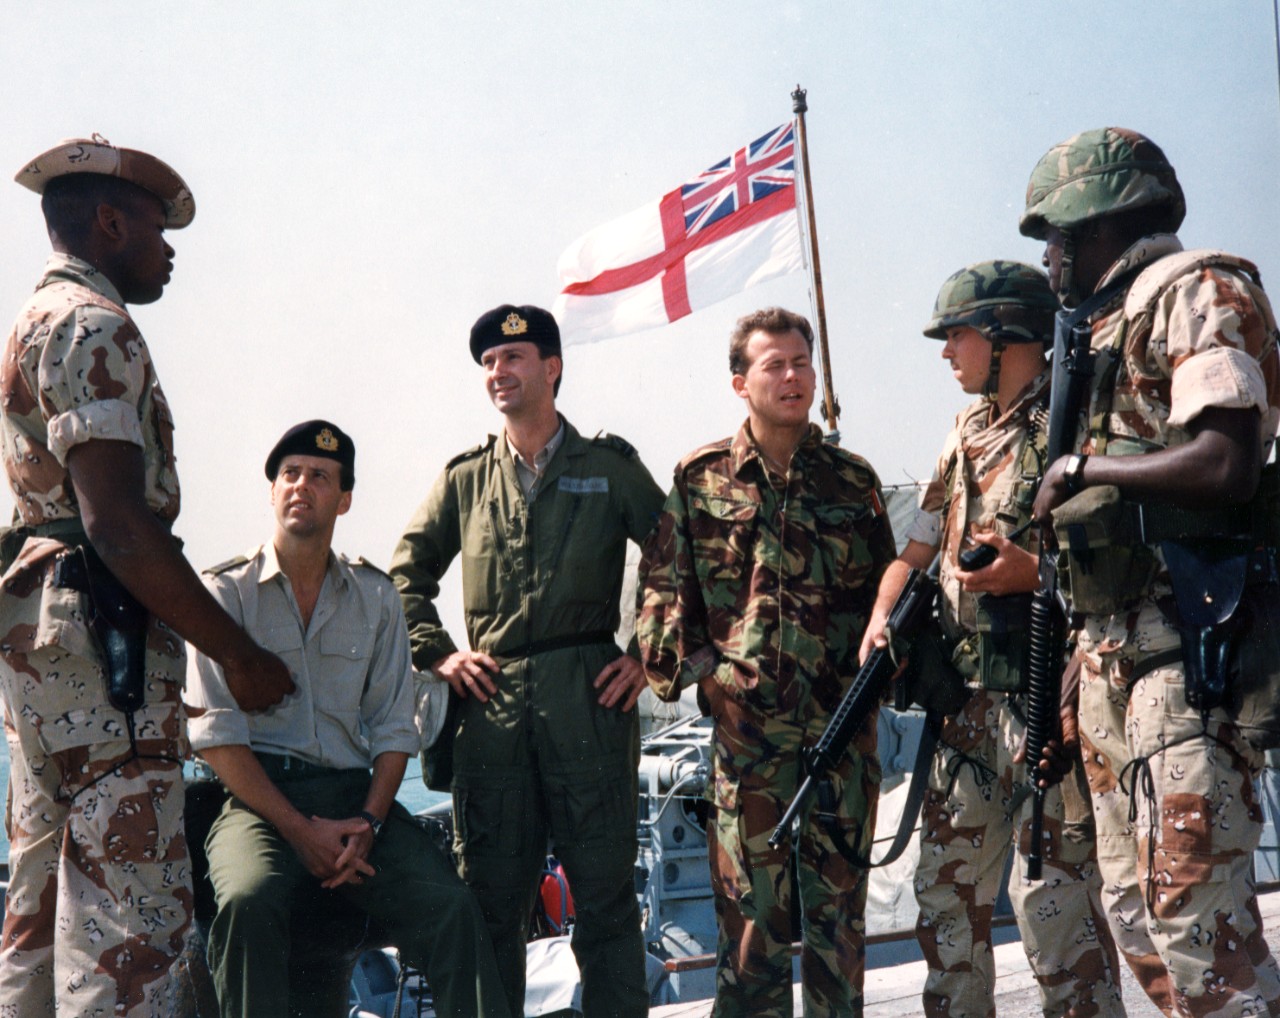 US and British military personnel converse in Bahrain on a pier beside the Royal Navy's logistic landing ship RFA Sir Galahad (L-3005). Pictured, from left, are: Corporal Lemuel Maynor, USMC; Lieutenant Paul Dobson, Lieutenant D.P. Wolstenholme, and Diver Steven Fitzjohn of the&nbsp;Royal Navy; Lance Corporal Riant L. Polson and Lance Corporal Reginald Robinson, USMC. Polson and Robinson are armed with M-16A2 rifles. The British and US military personnel are making a port call during Operation Desert Storm.